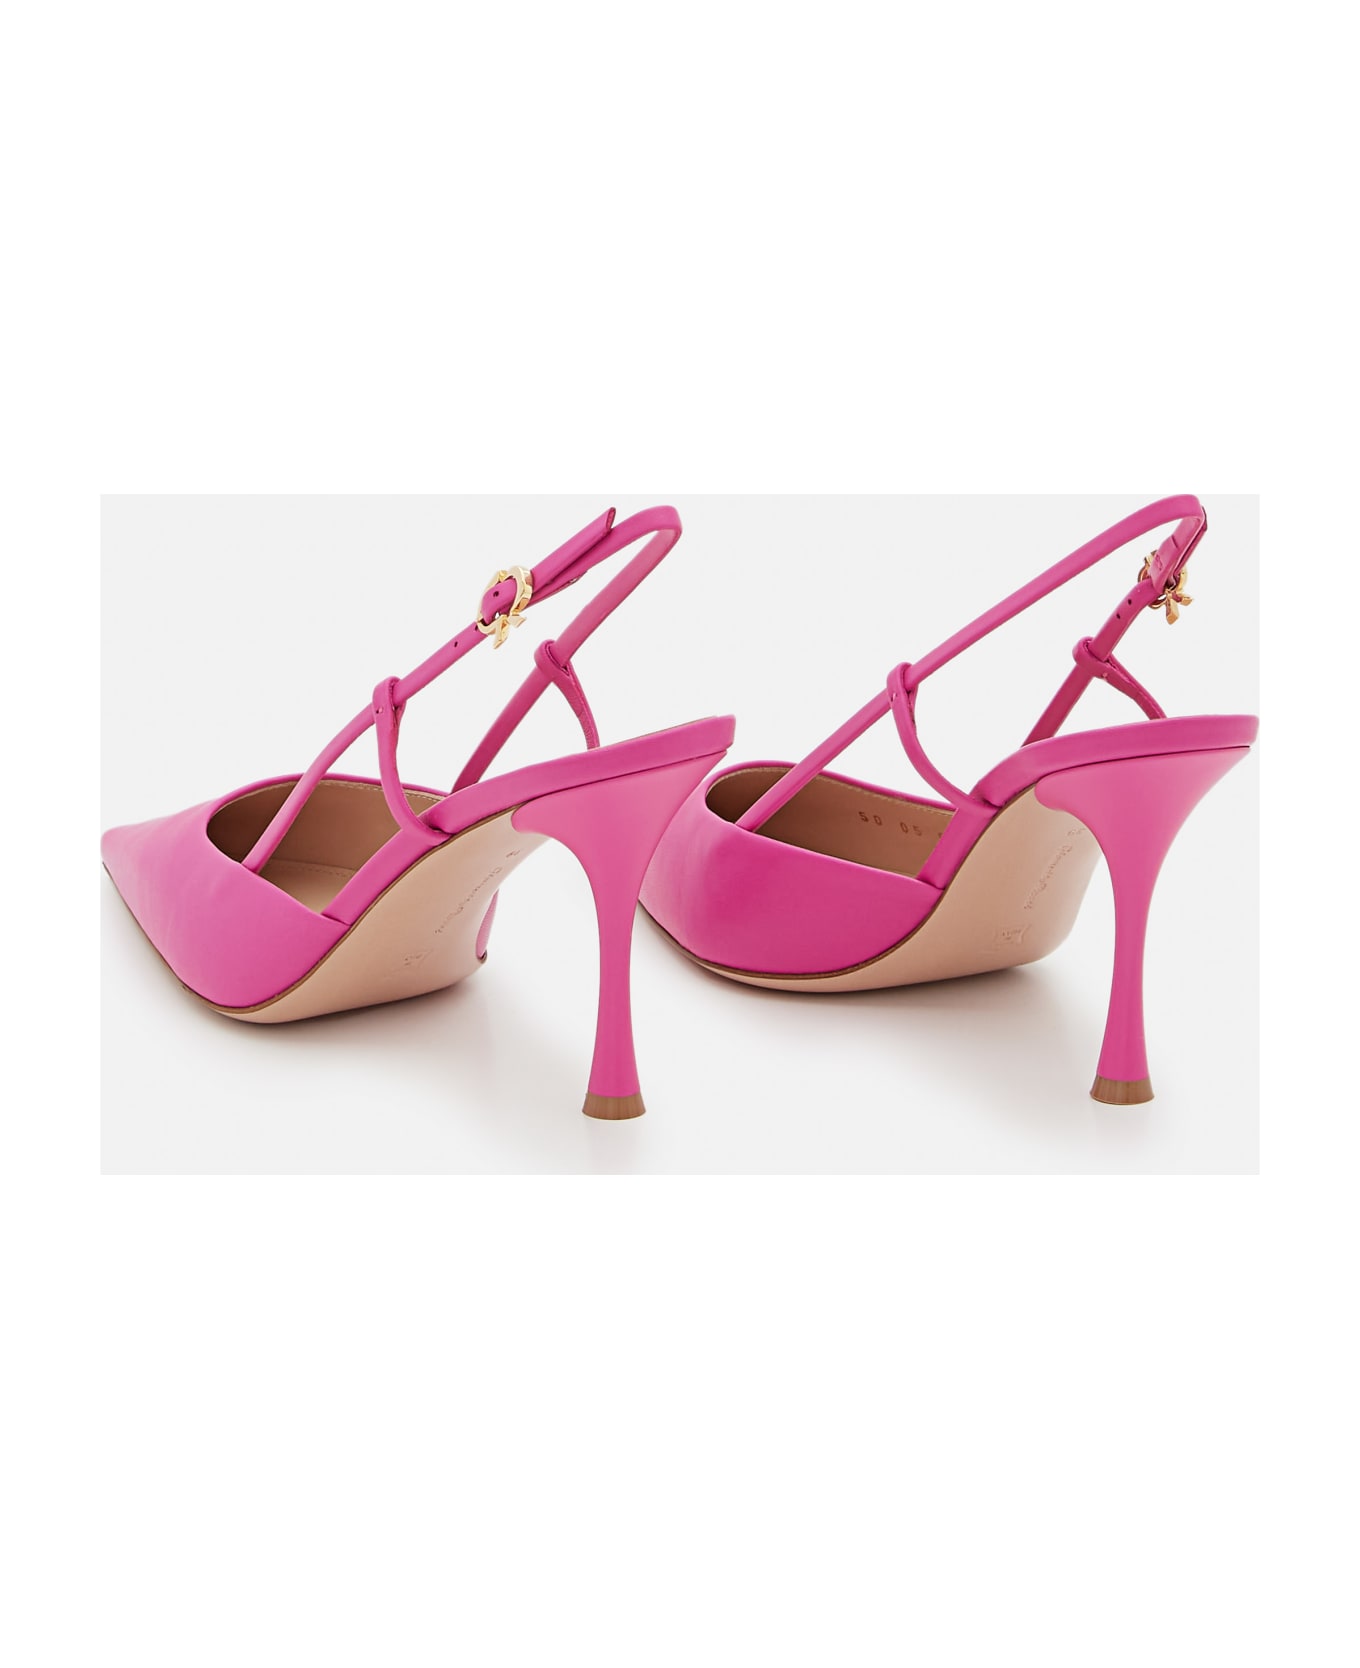 Gianvito Rossi 85mm Ascent Leather Pumps - Pink ハイヒール